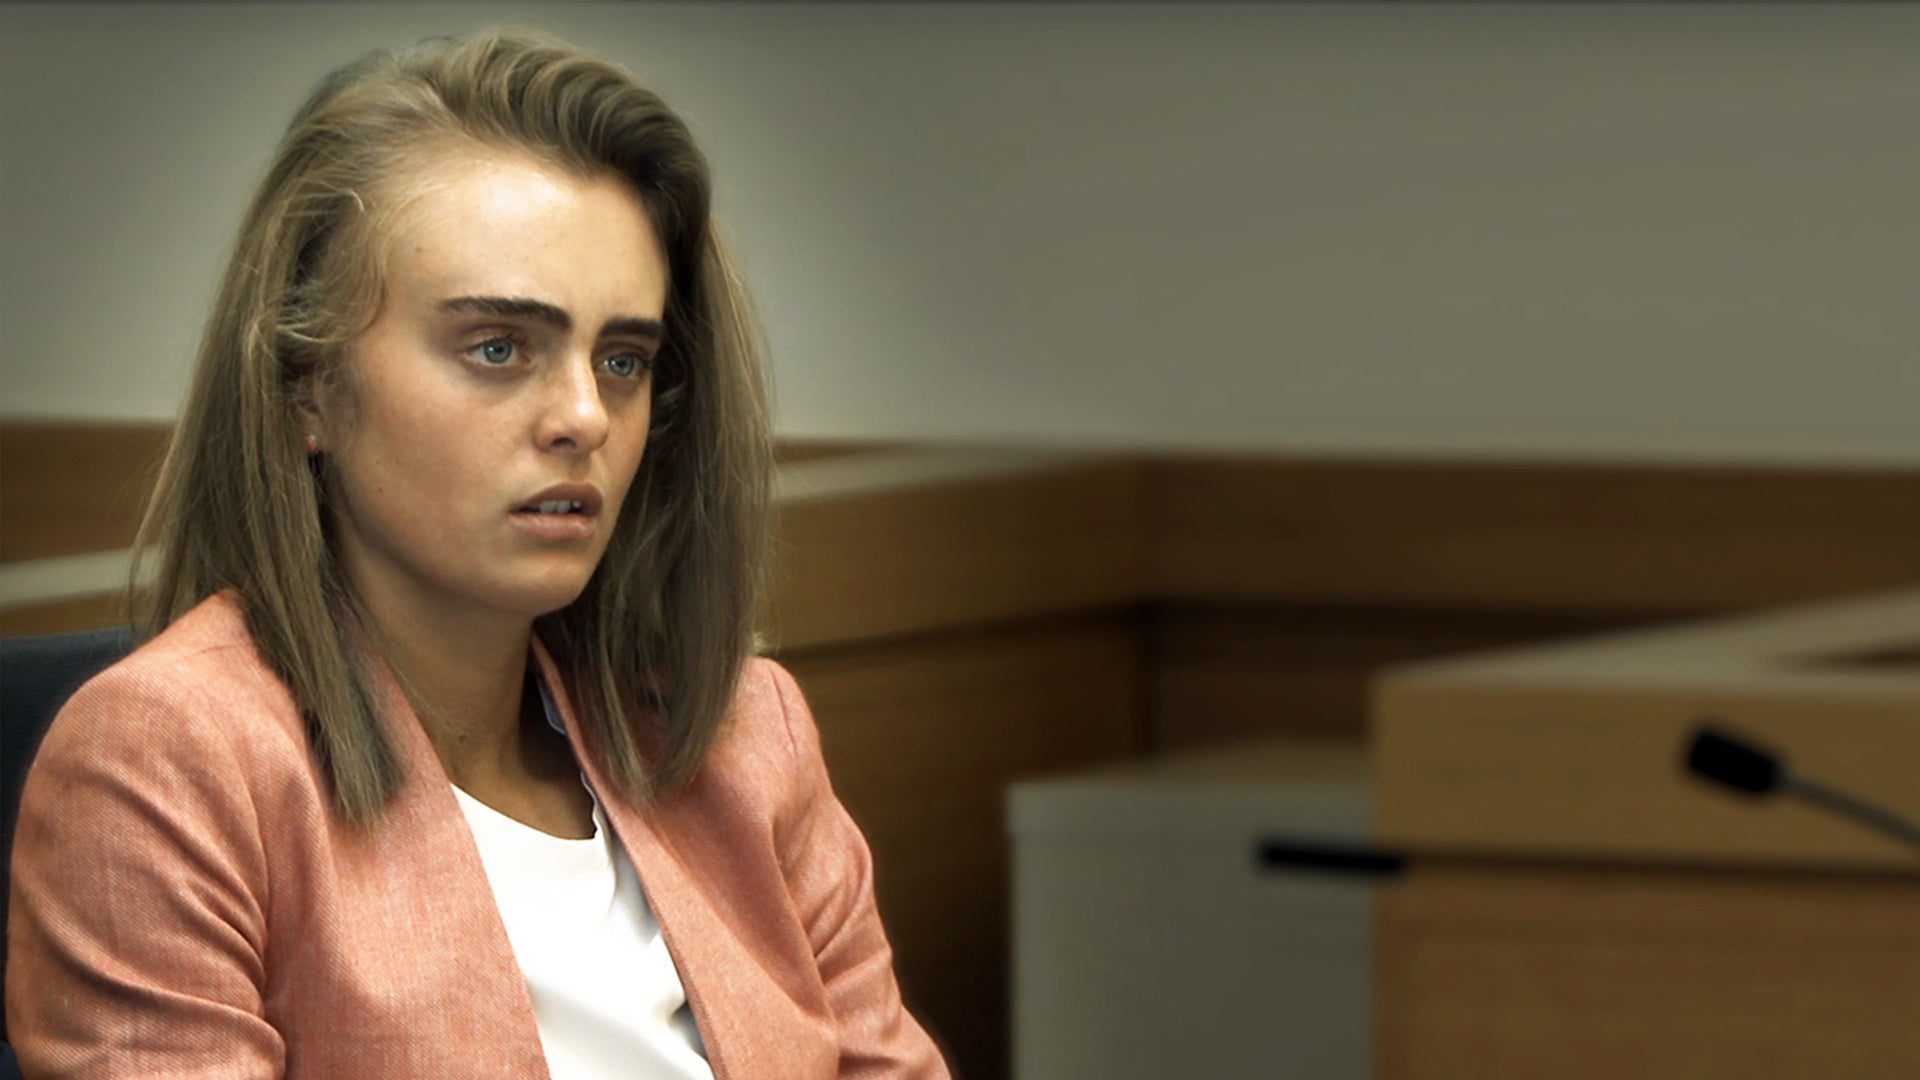 Michelle Carter Doc: How Stereotypes About Teenage Girls Influenced the Texting Suicide Case (Watch)